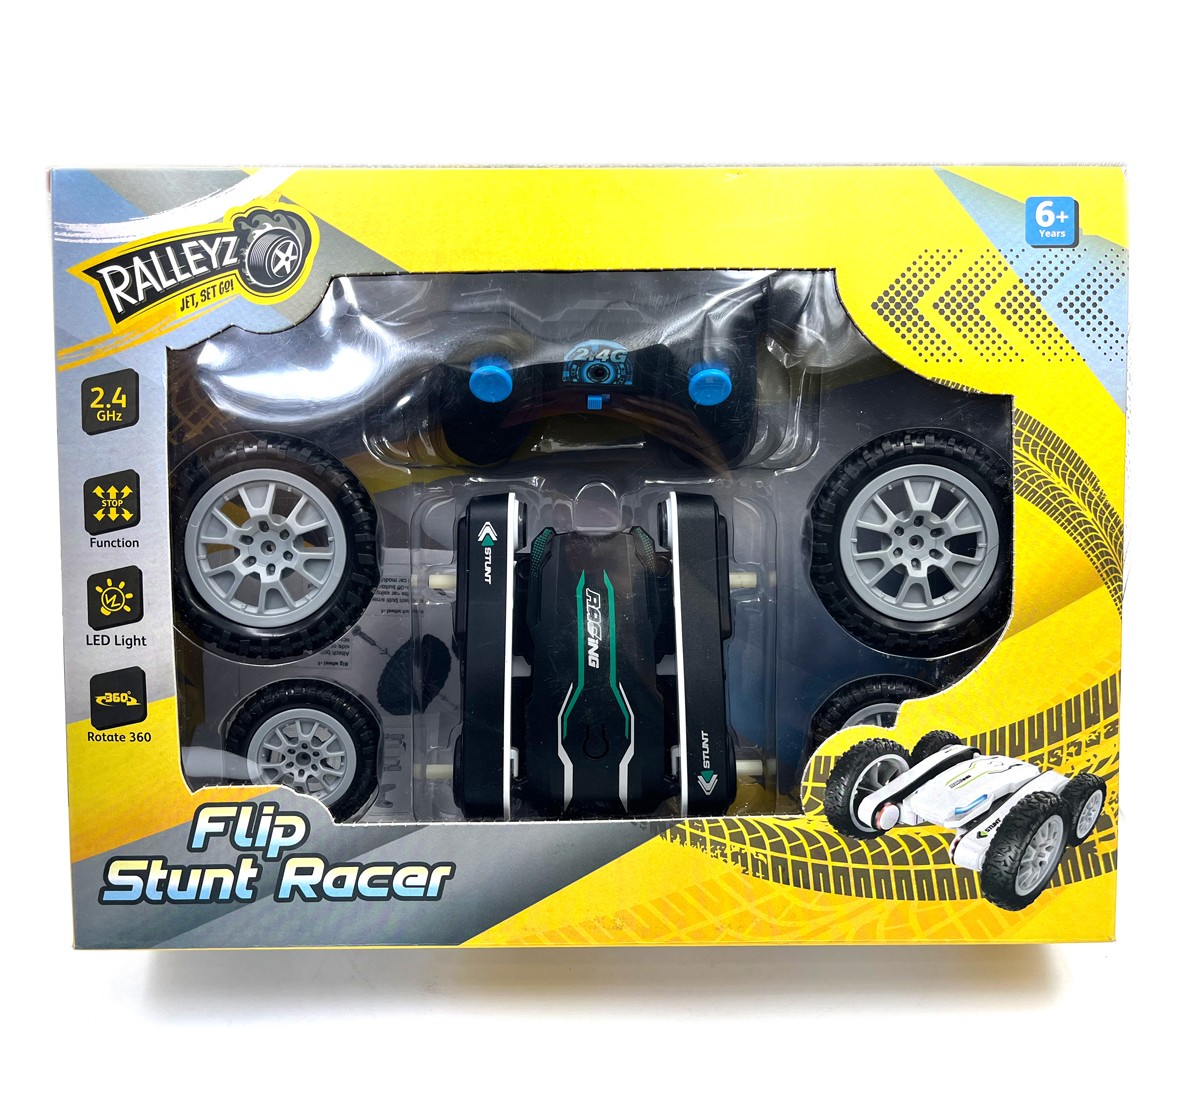 Ralleyz 2.4G 2 In1 Remote Control Stunt Car, Changeable Wheels With Charger, Black, 6Y+